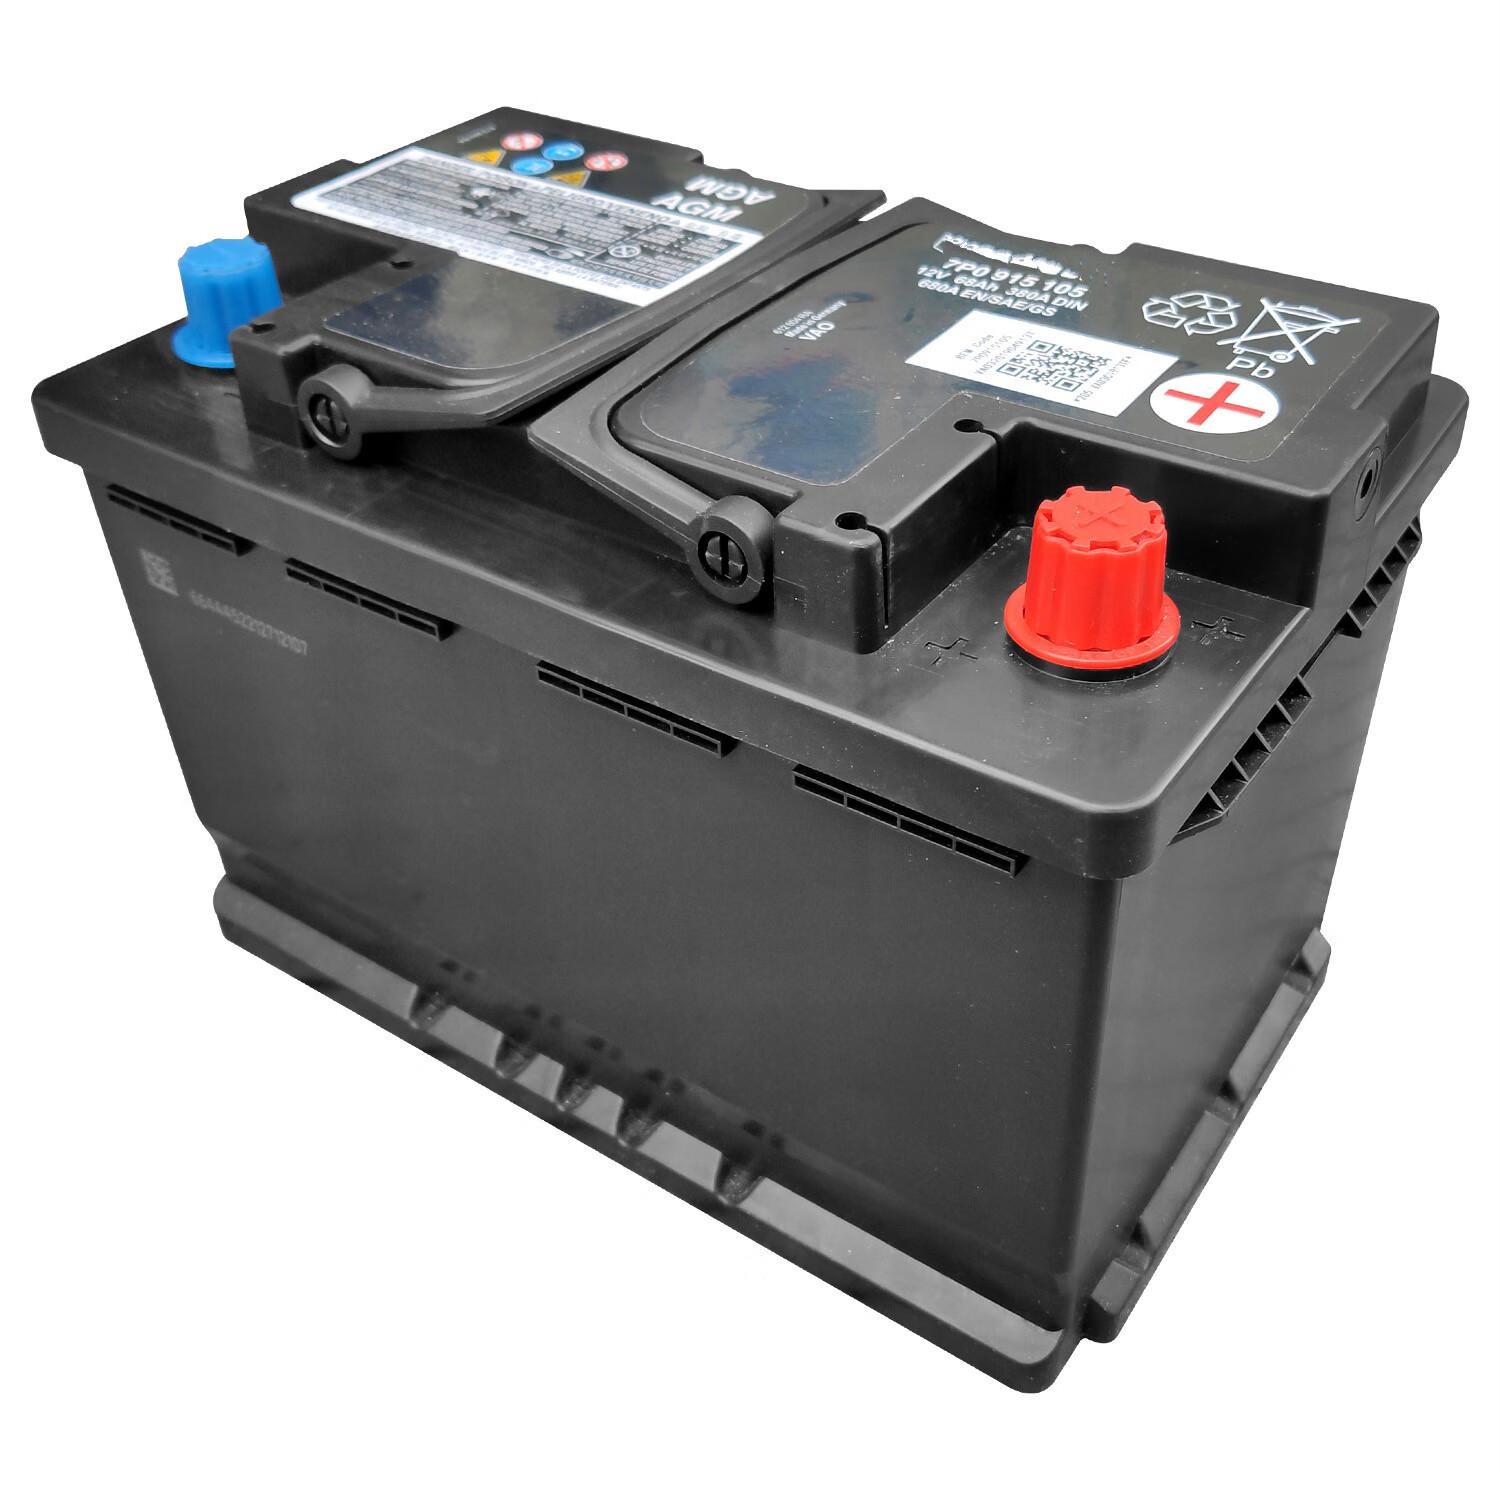 Key Differences Between Lifepo4 Battery and AGM Battery